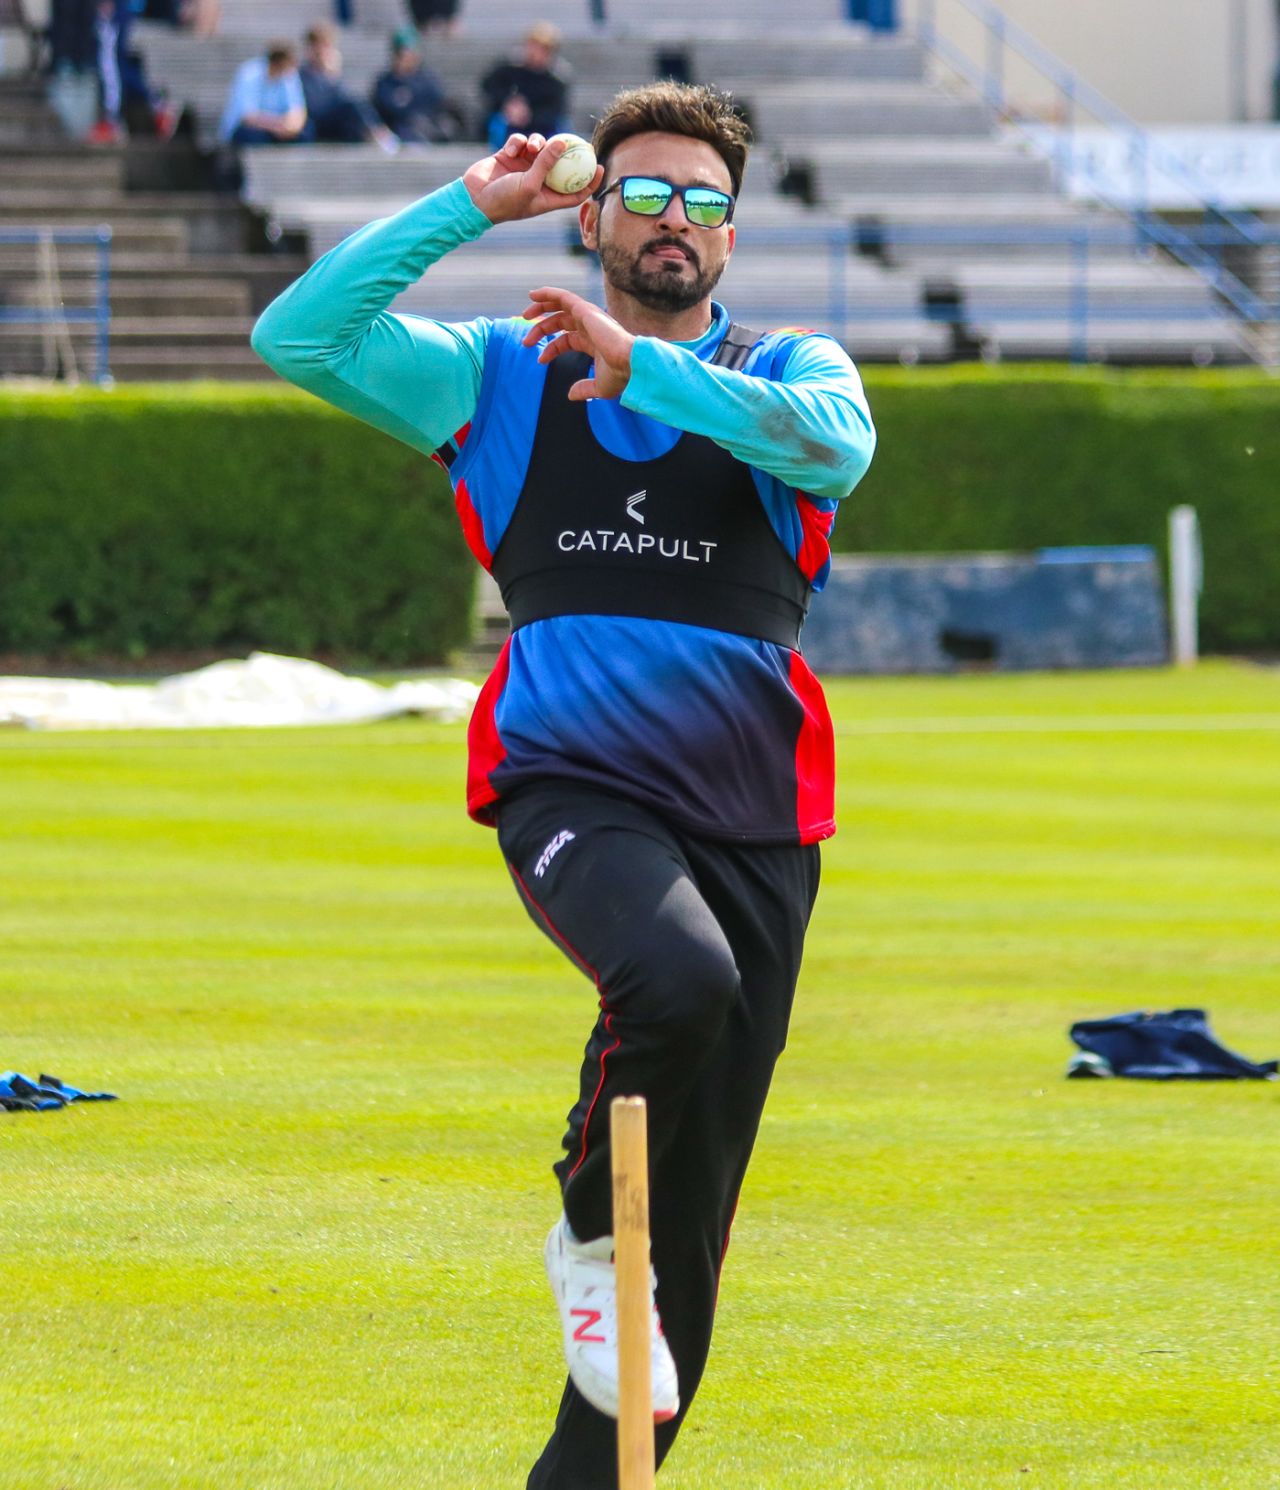 Hamid Hassan gets back into rhythm in his delivery stride at training, Edinburgh, May 9, 2019